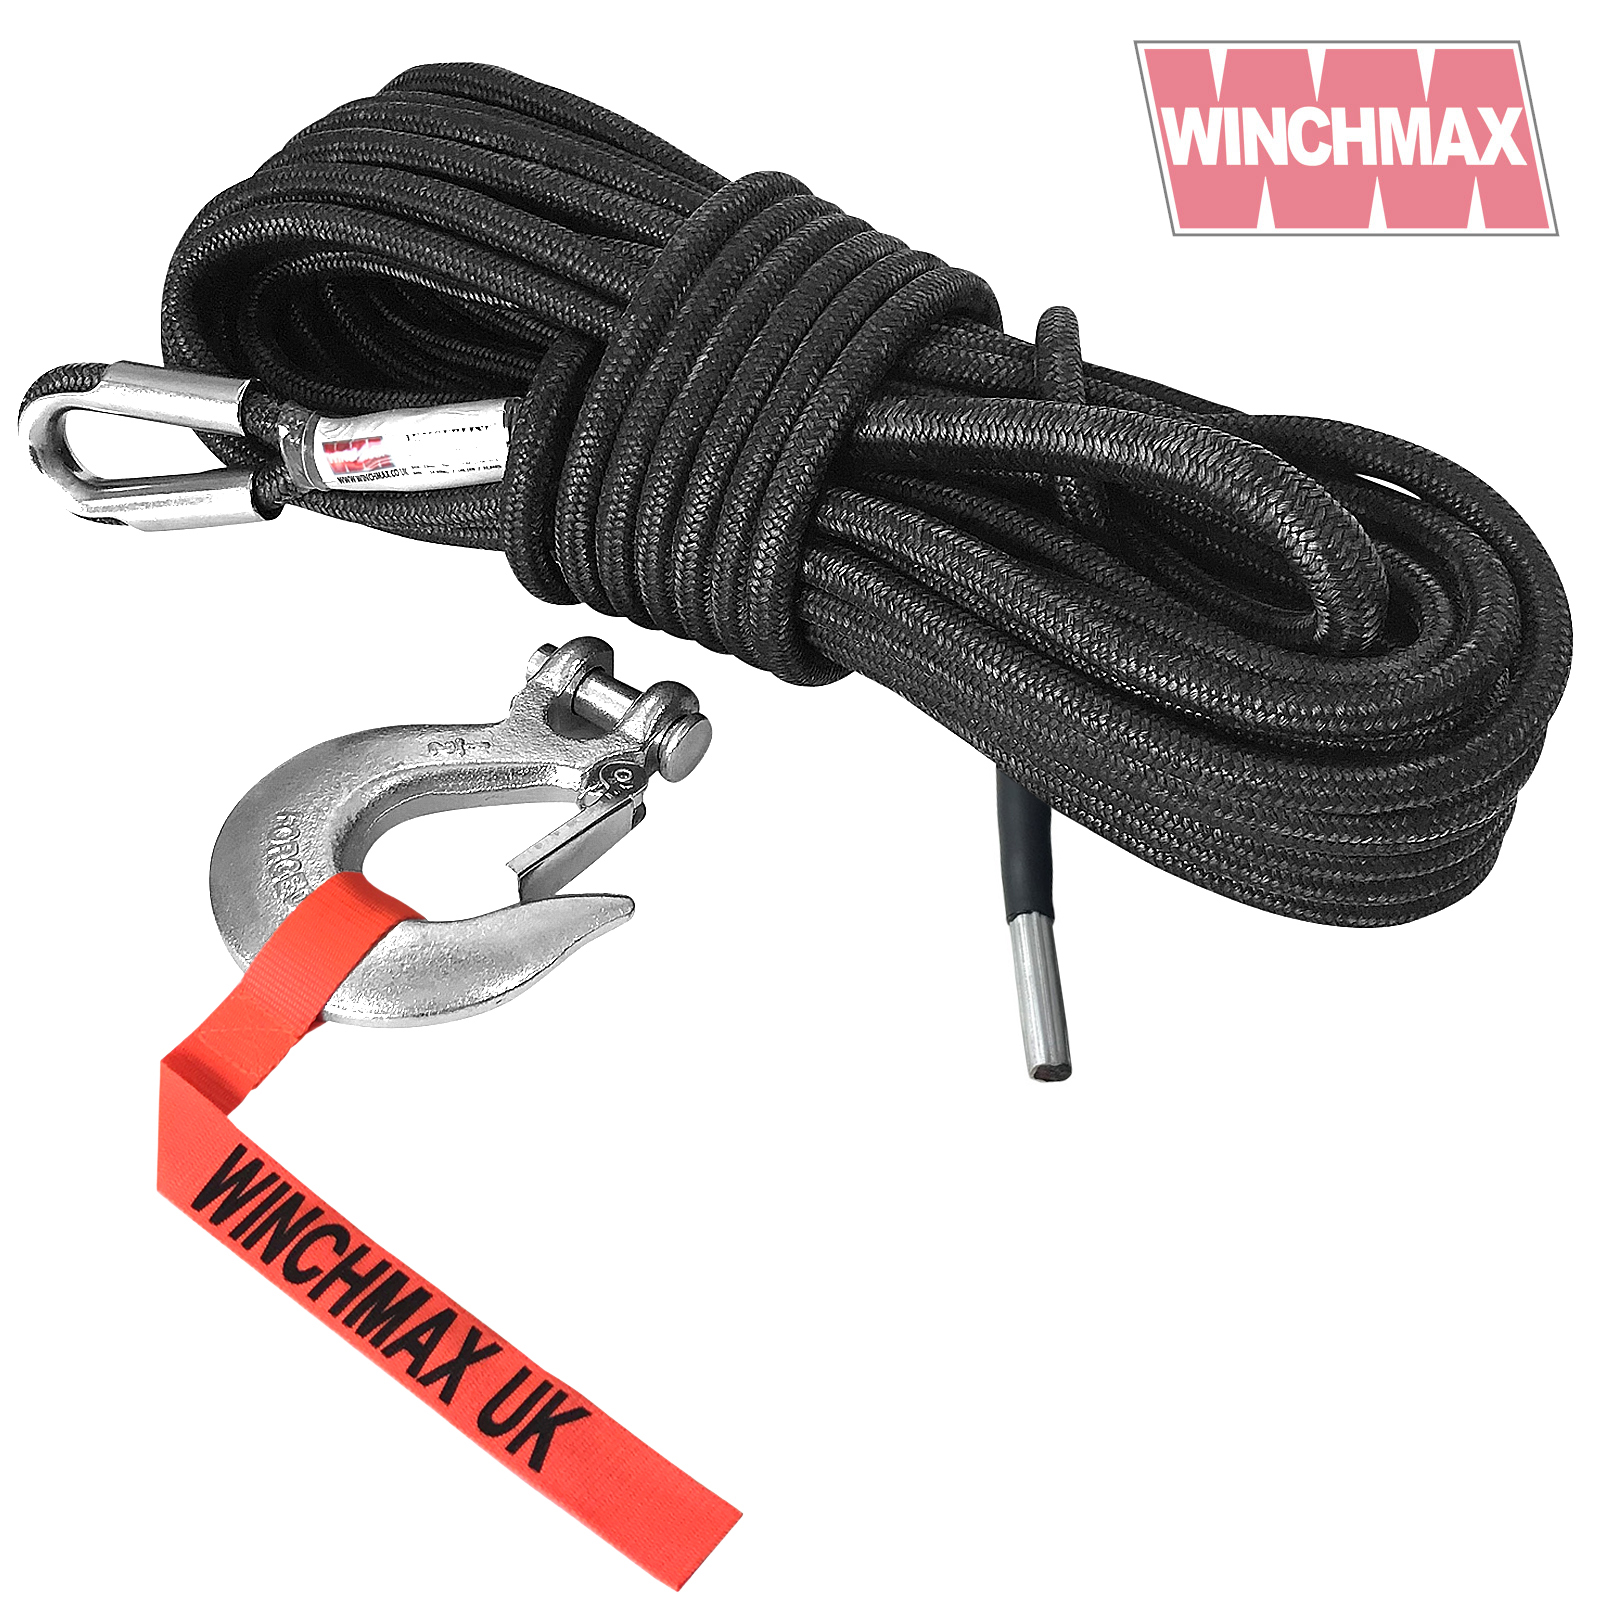 Armourline Synthetic Rope 20m x 15.5mm, Hole Fix. 1/2 Inch Clevis